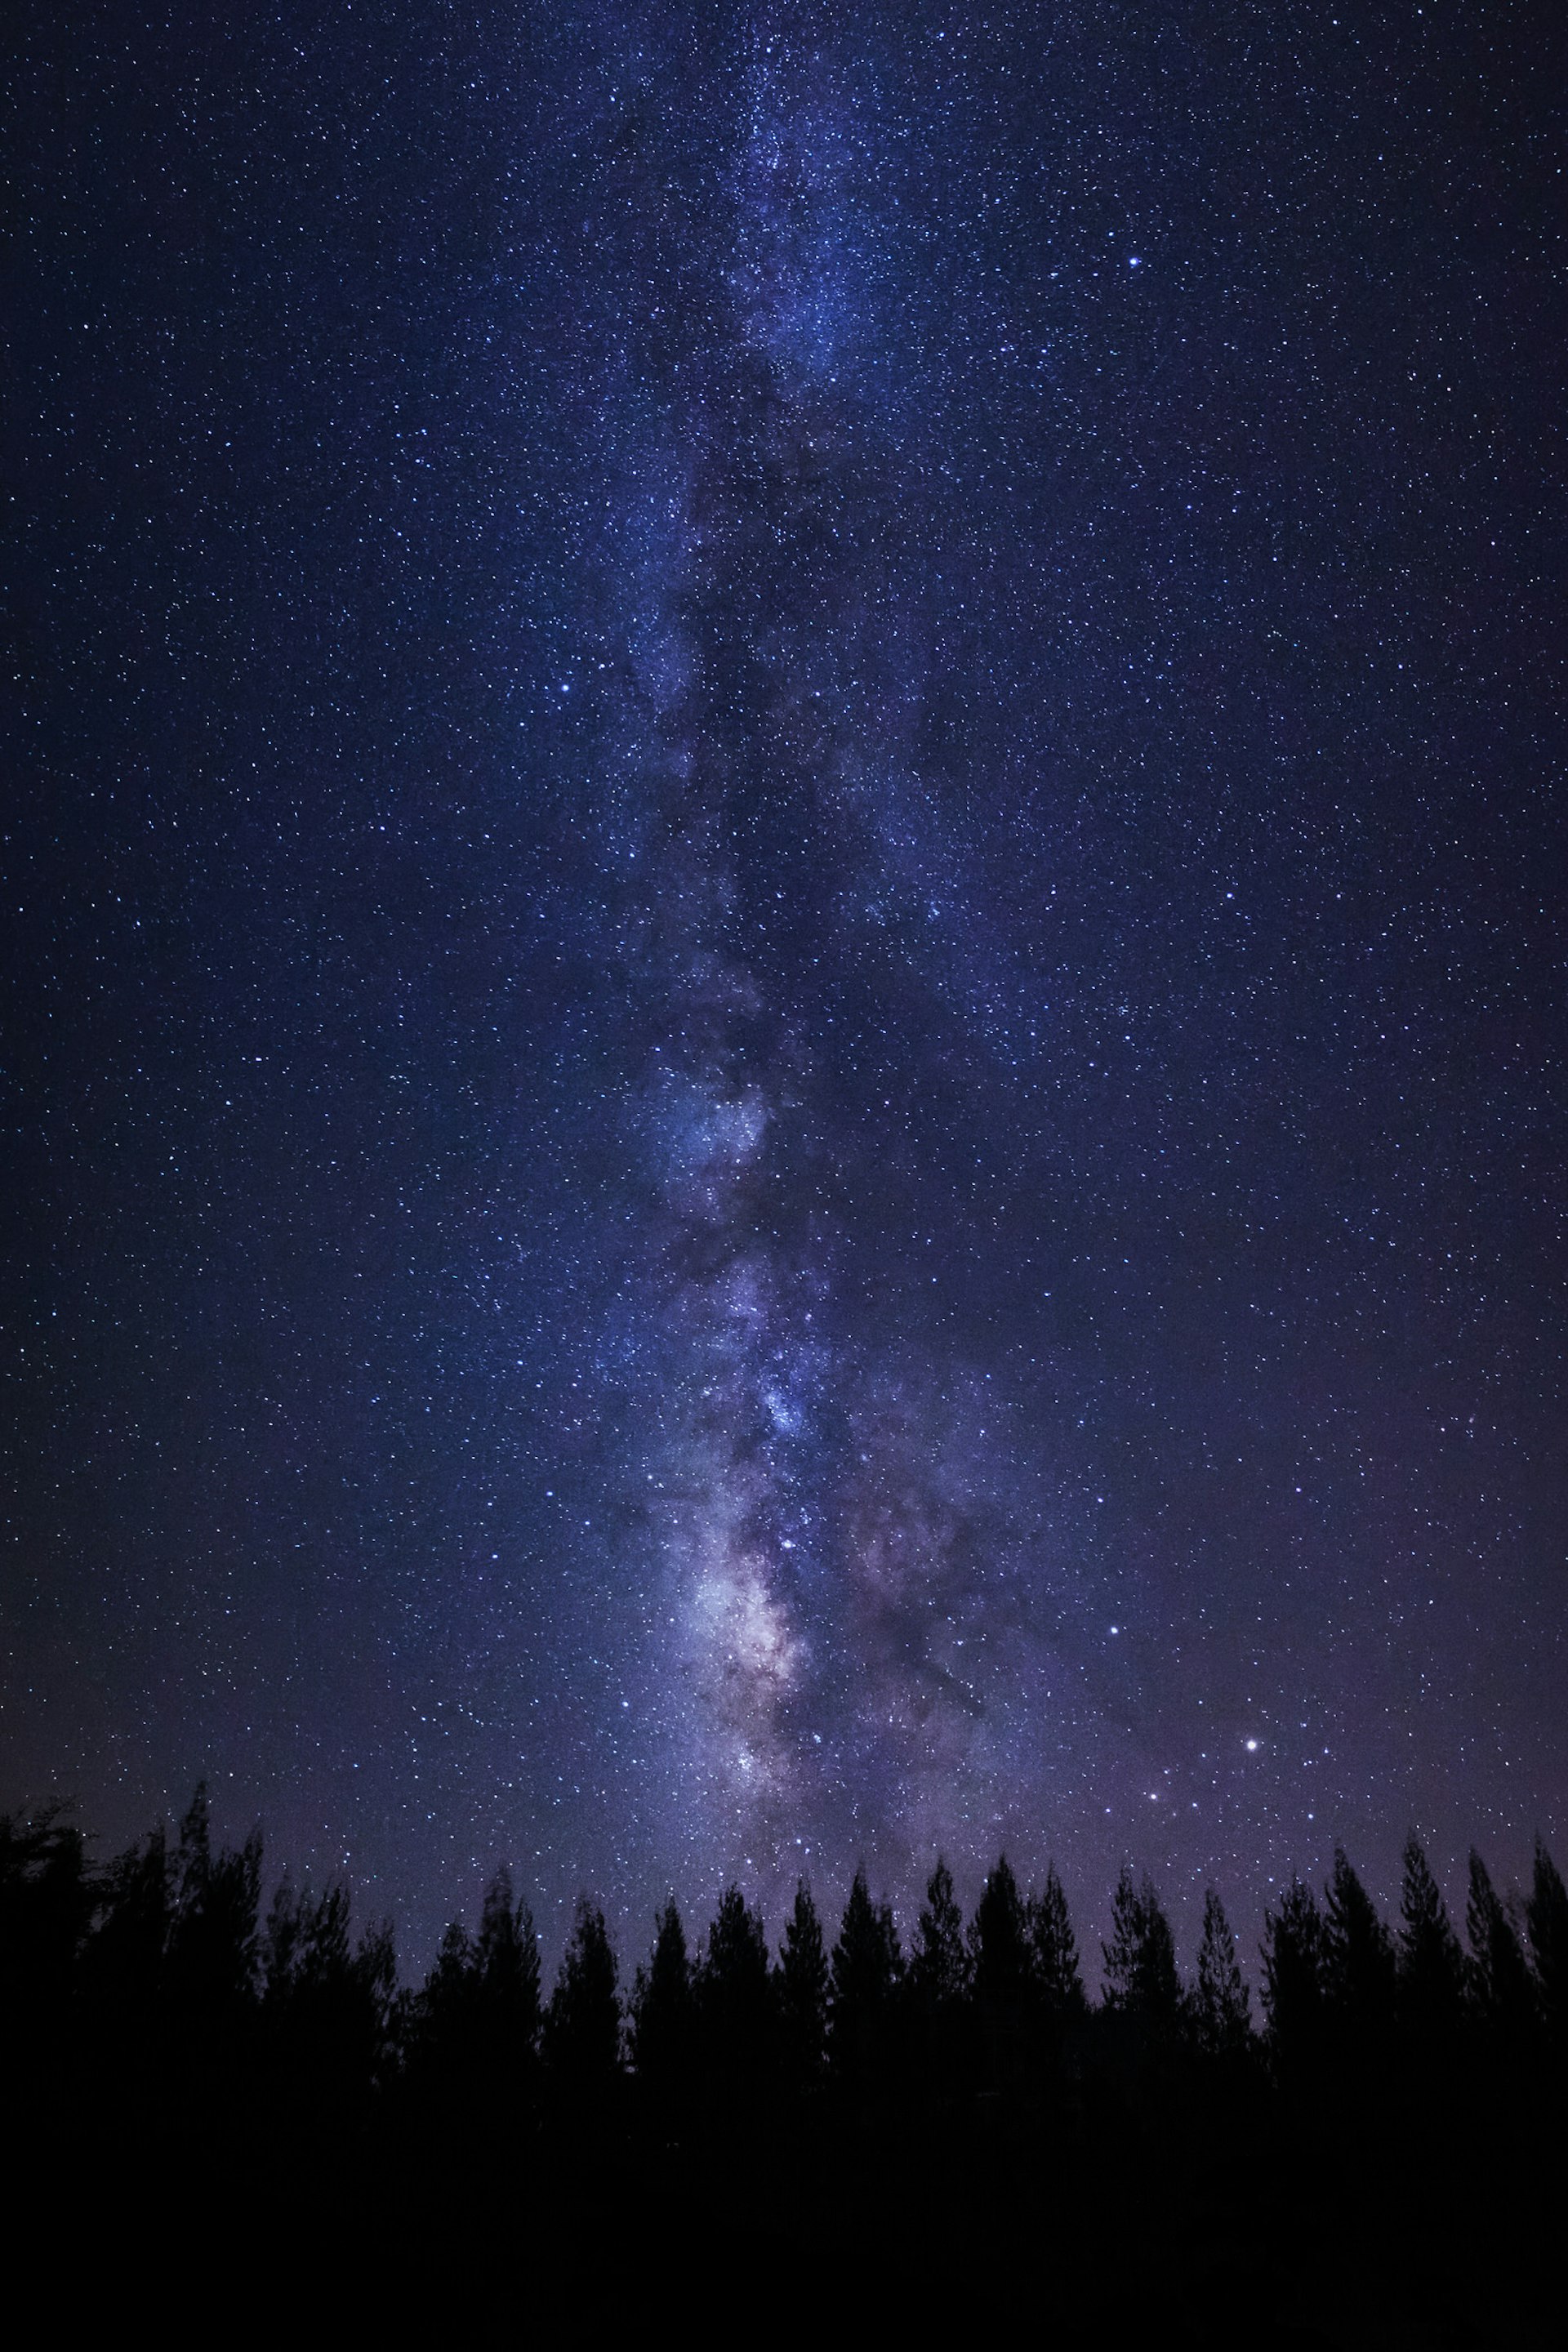 The Milky Way above a forest silhouette